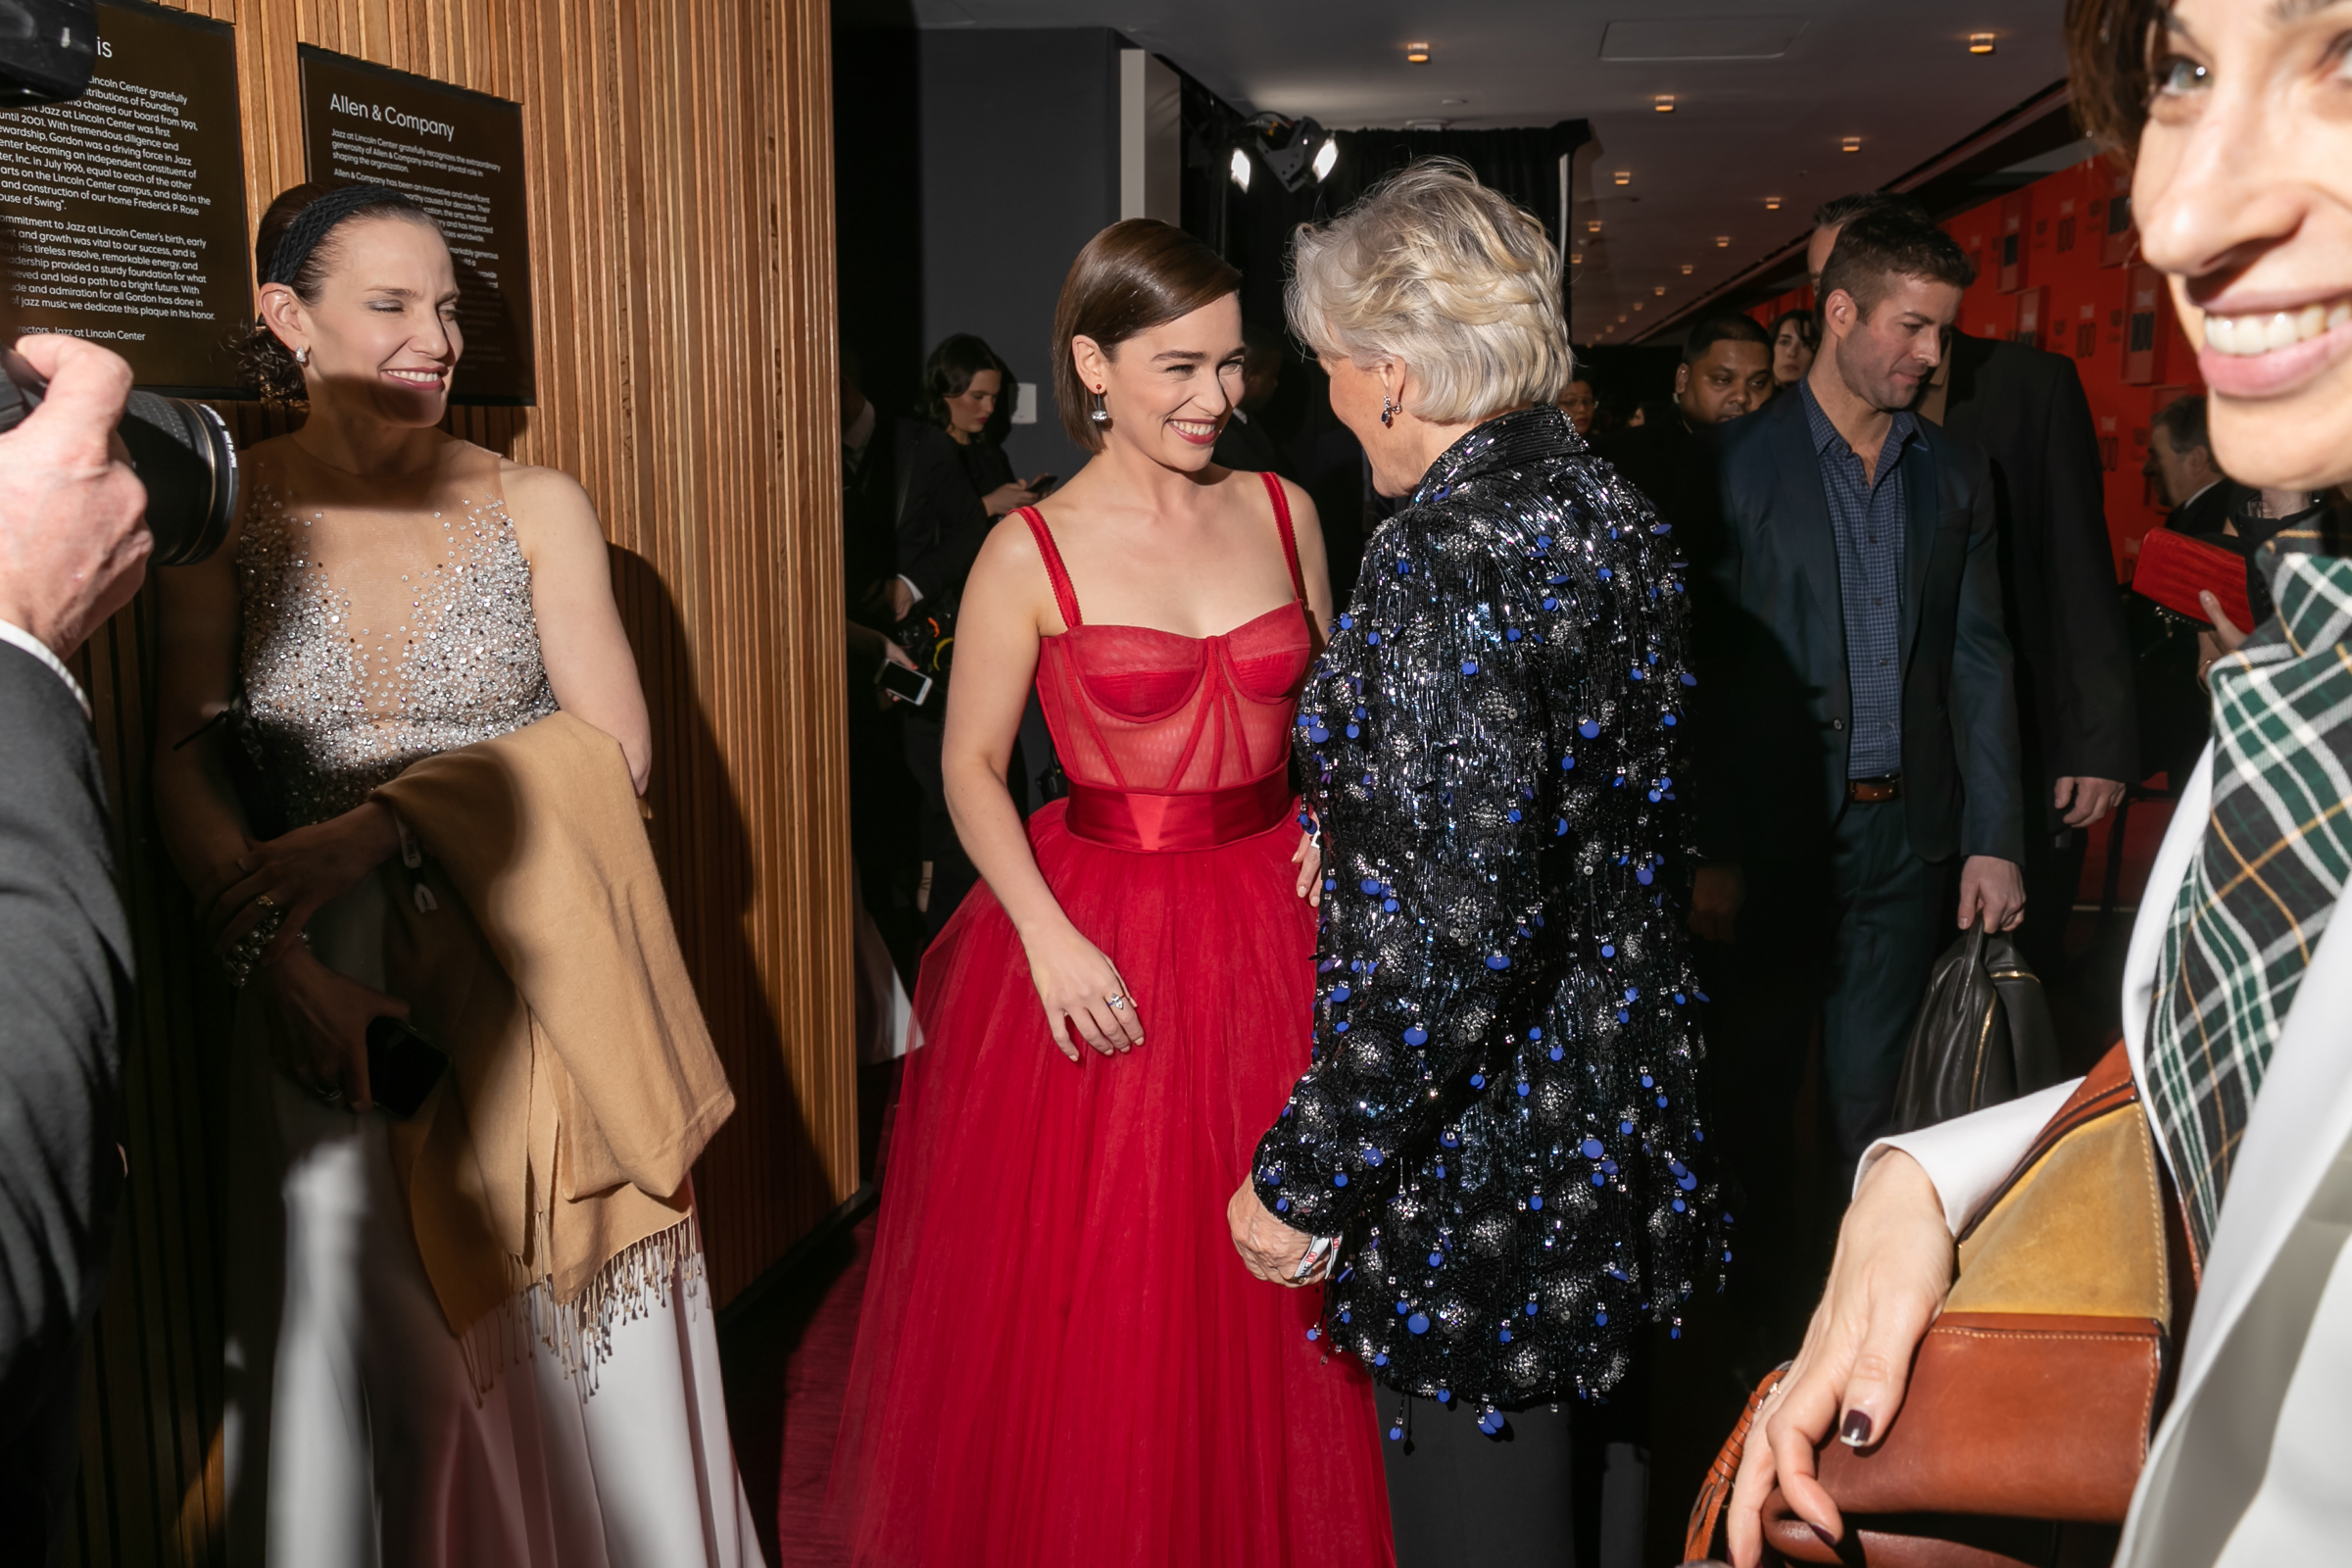 Emilia Clarke and Glenn Close at the Time 100 Gala at Jazz at Lincoln Center in New York City on April 23, 2019. (Kevin Tachman for TIME)